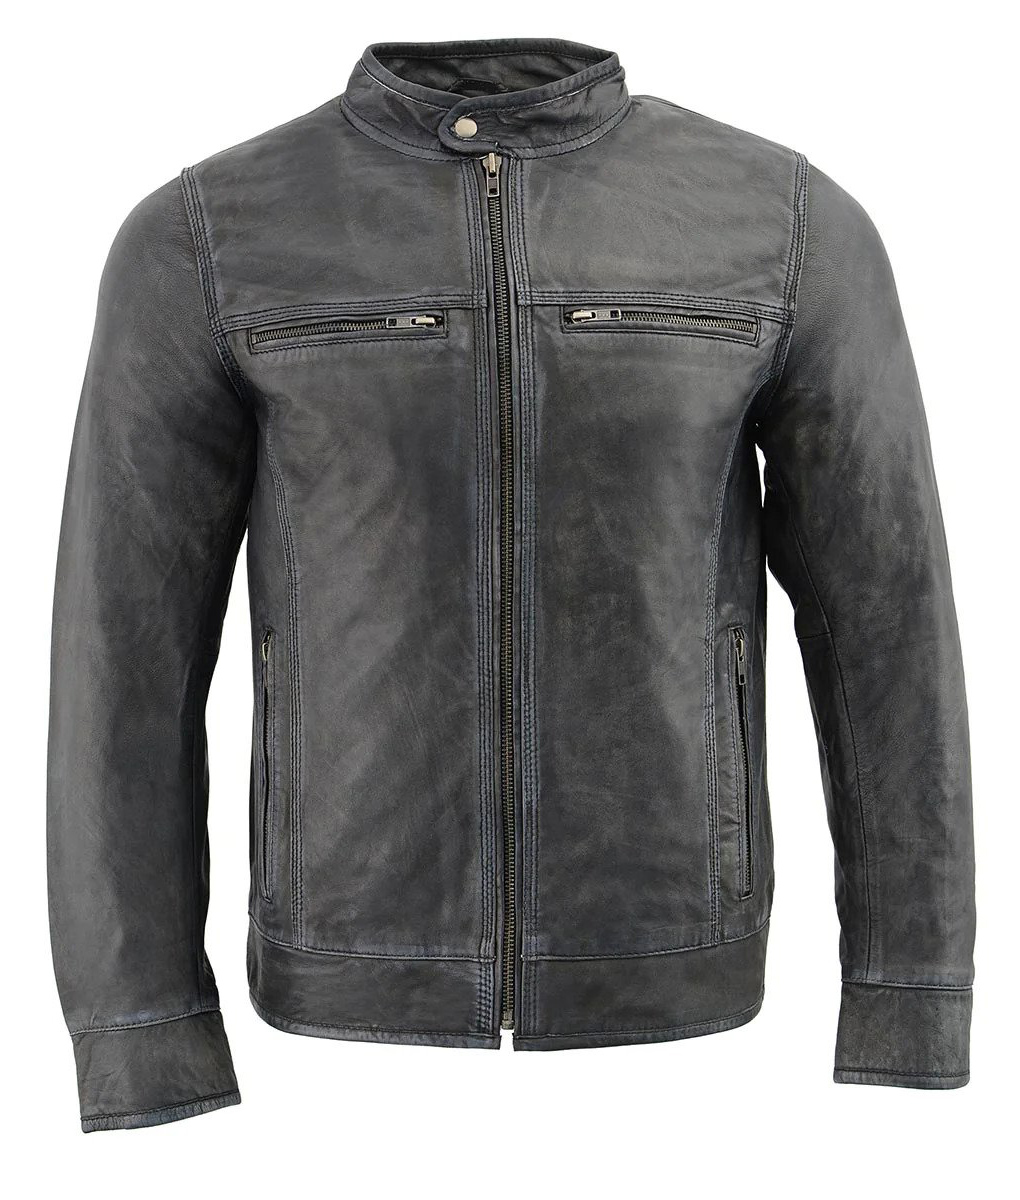 Dominic Men's Gray Retro Heavy Stitched Leather Cafe Racer Jacket